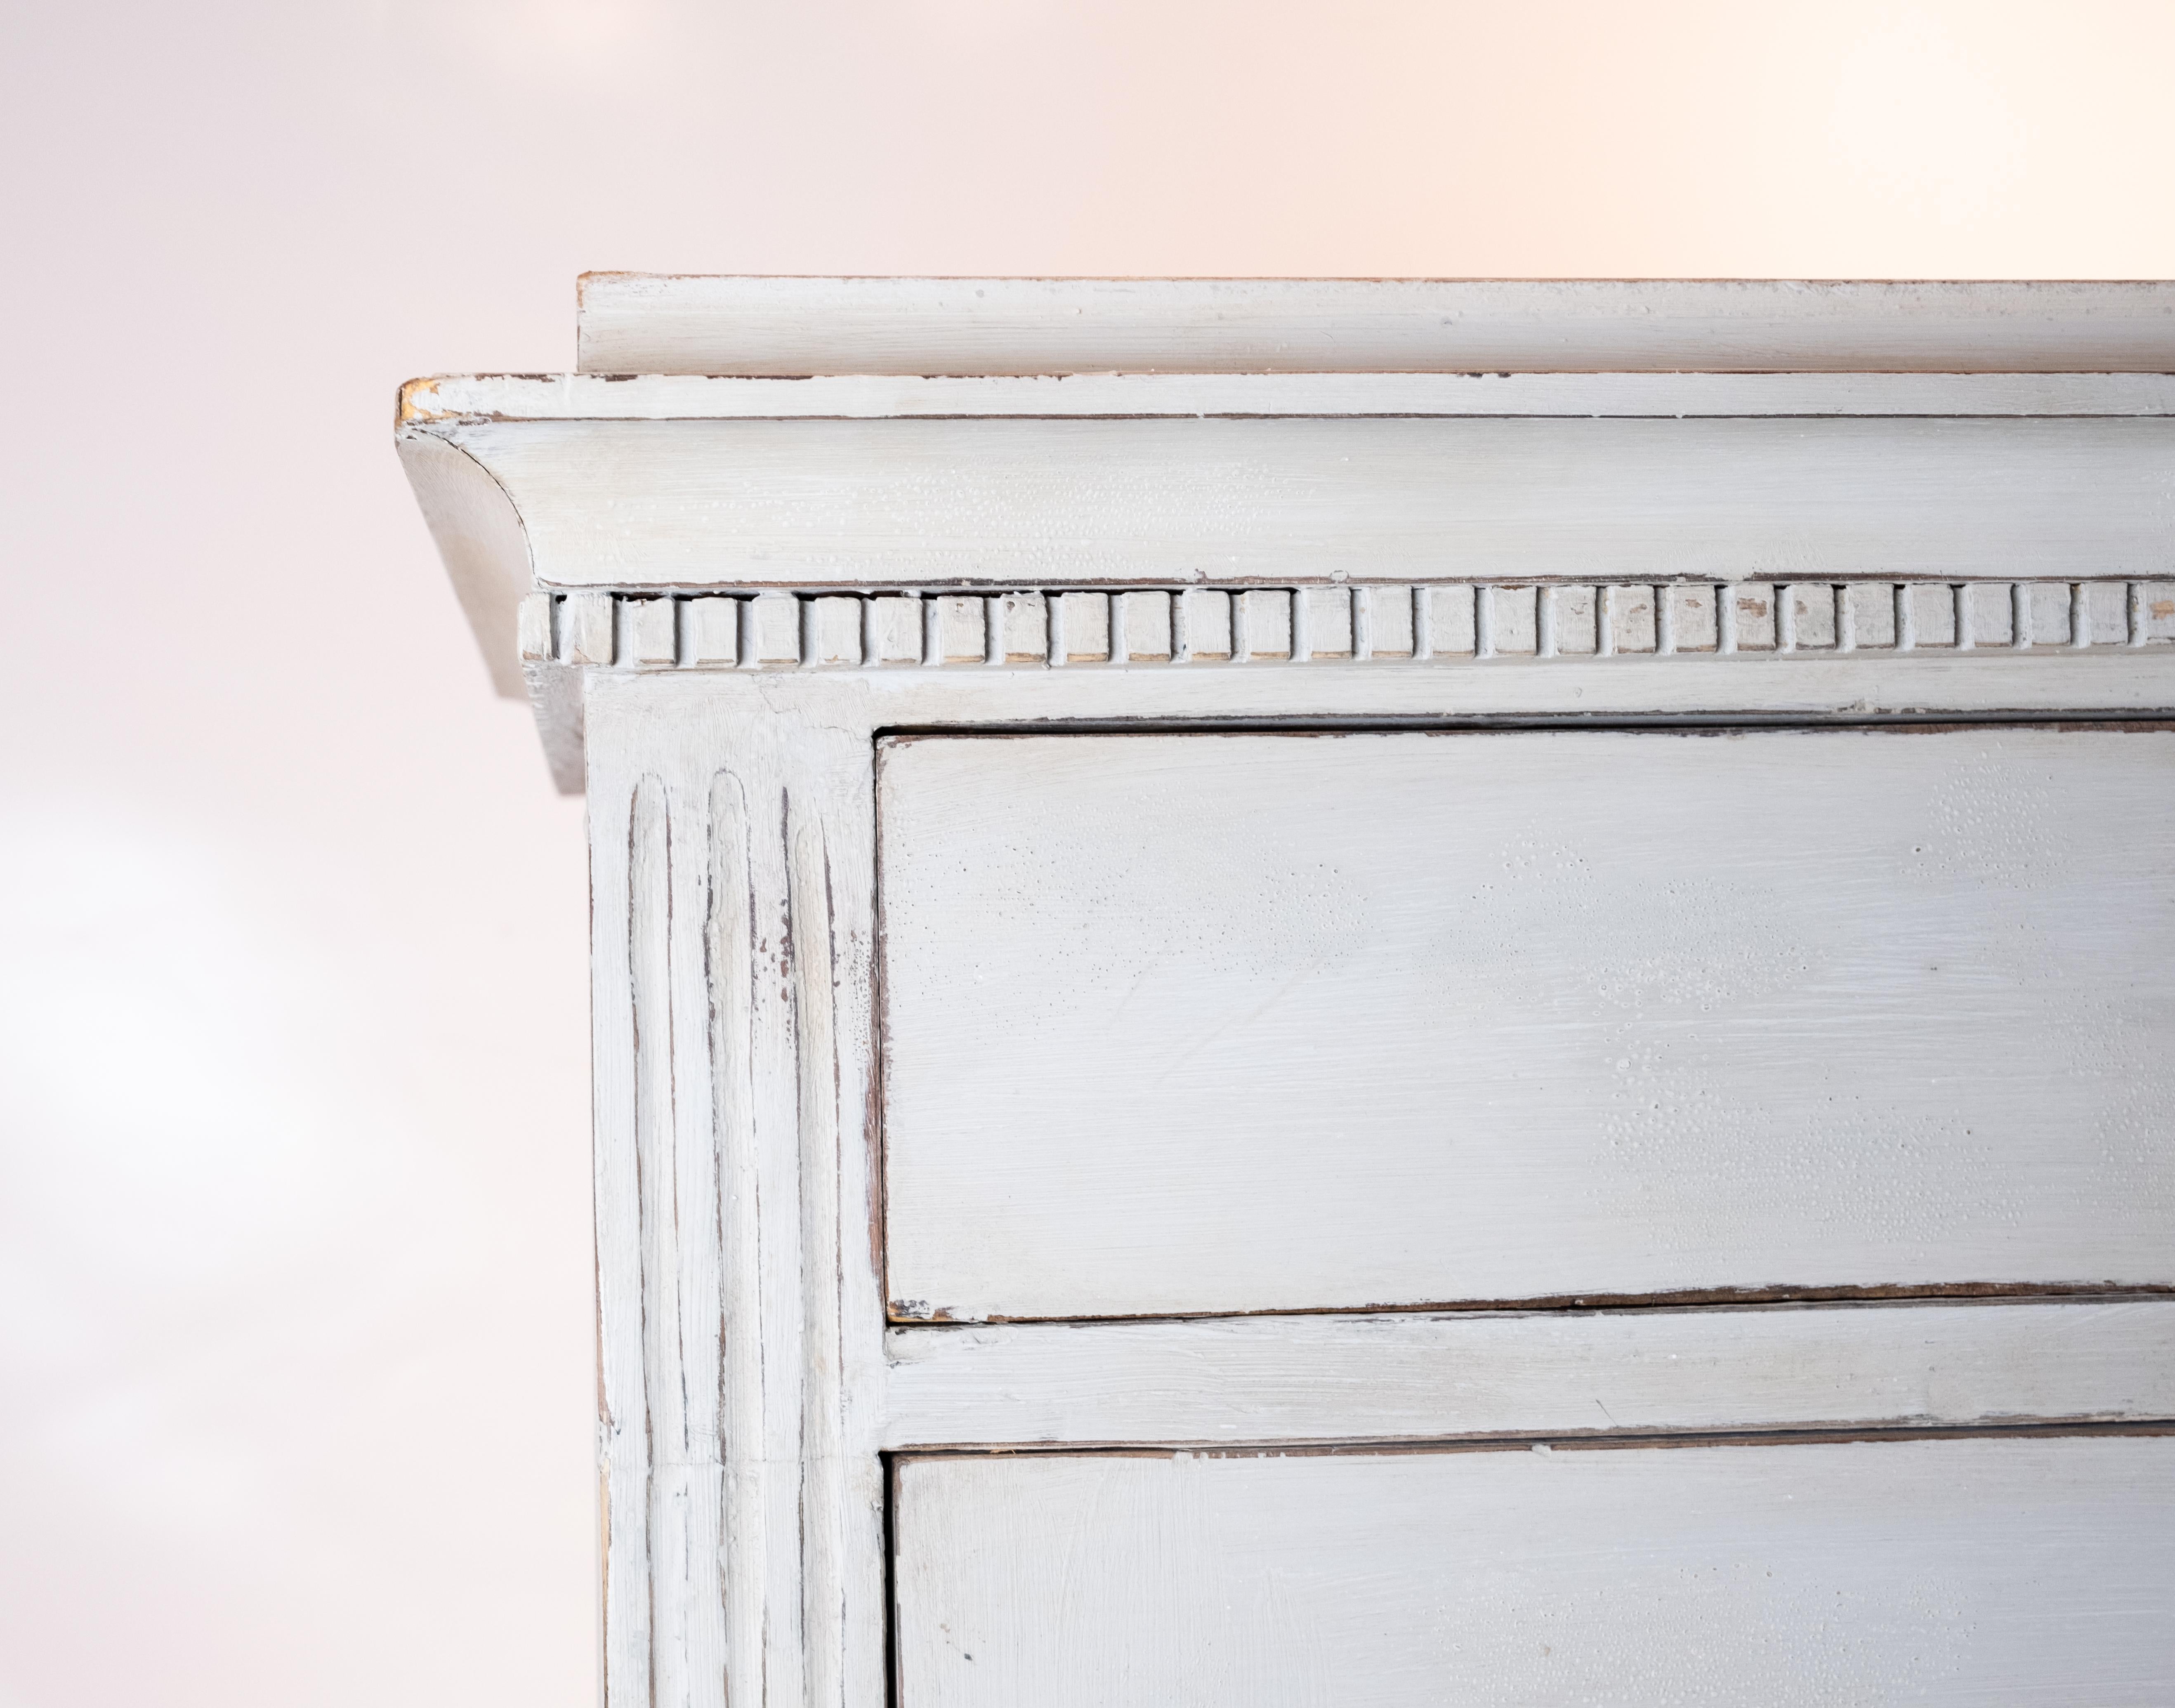 Grey Painted Gustavian Tall Cabinet, in Great Condition from the 1840s 3